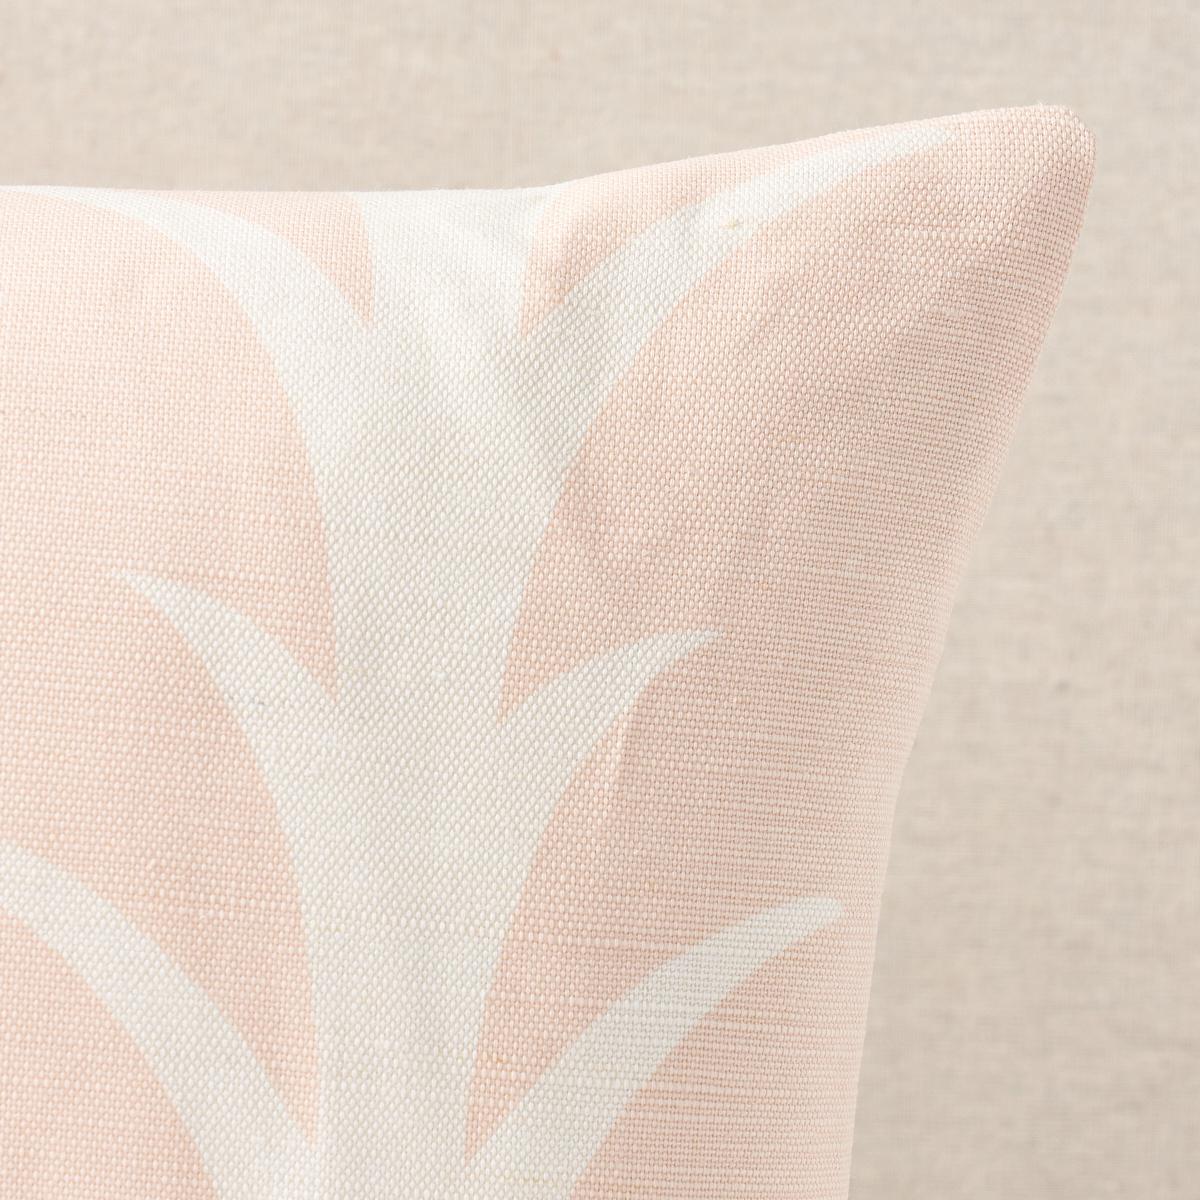 This pillow features Acanthus Stripe by Celerie Kemble for Schumacher with a knife edge finish. This pattern is a stylized stripe based on a classic acanthus motif. Elegant and airy, the design is also incredibly easy to use. Also available as a